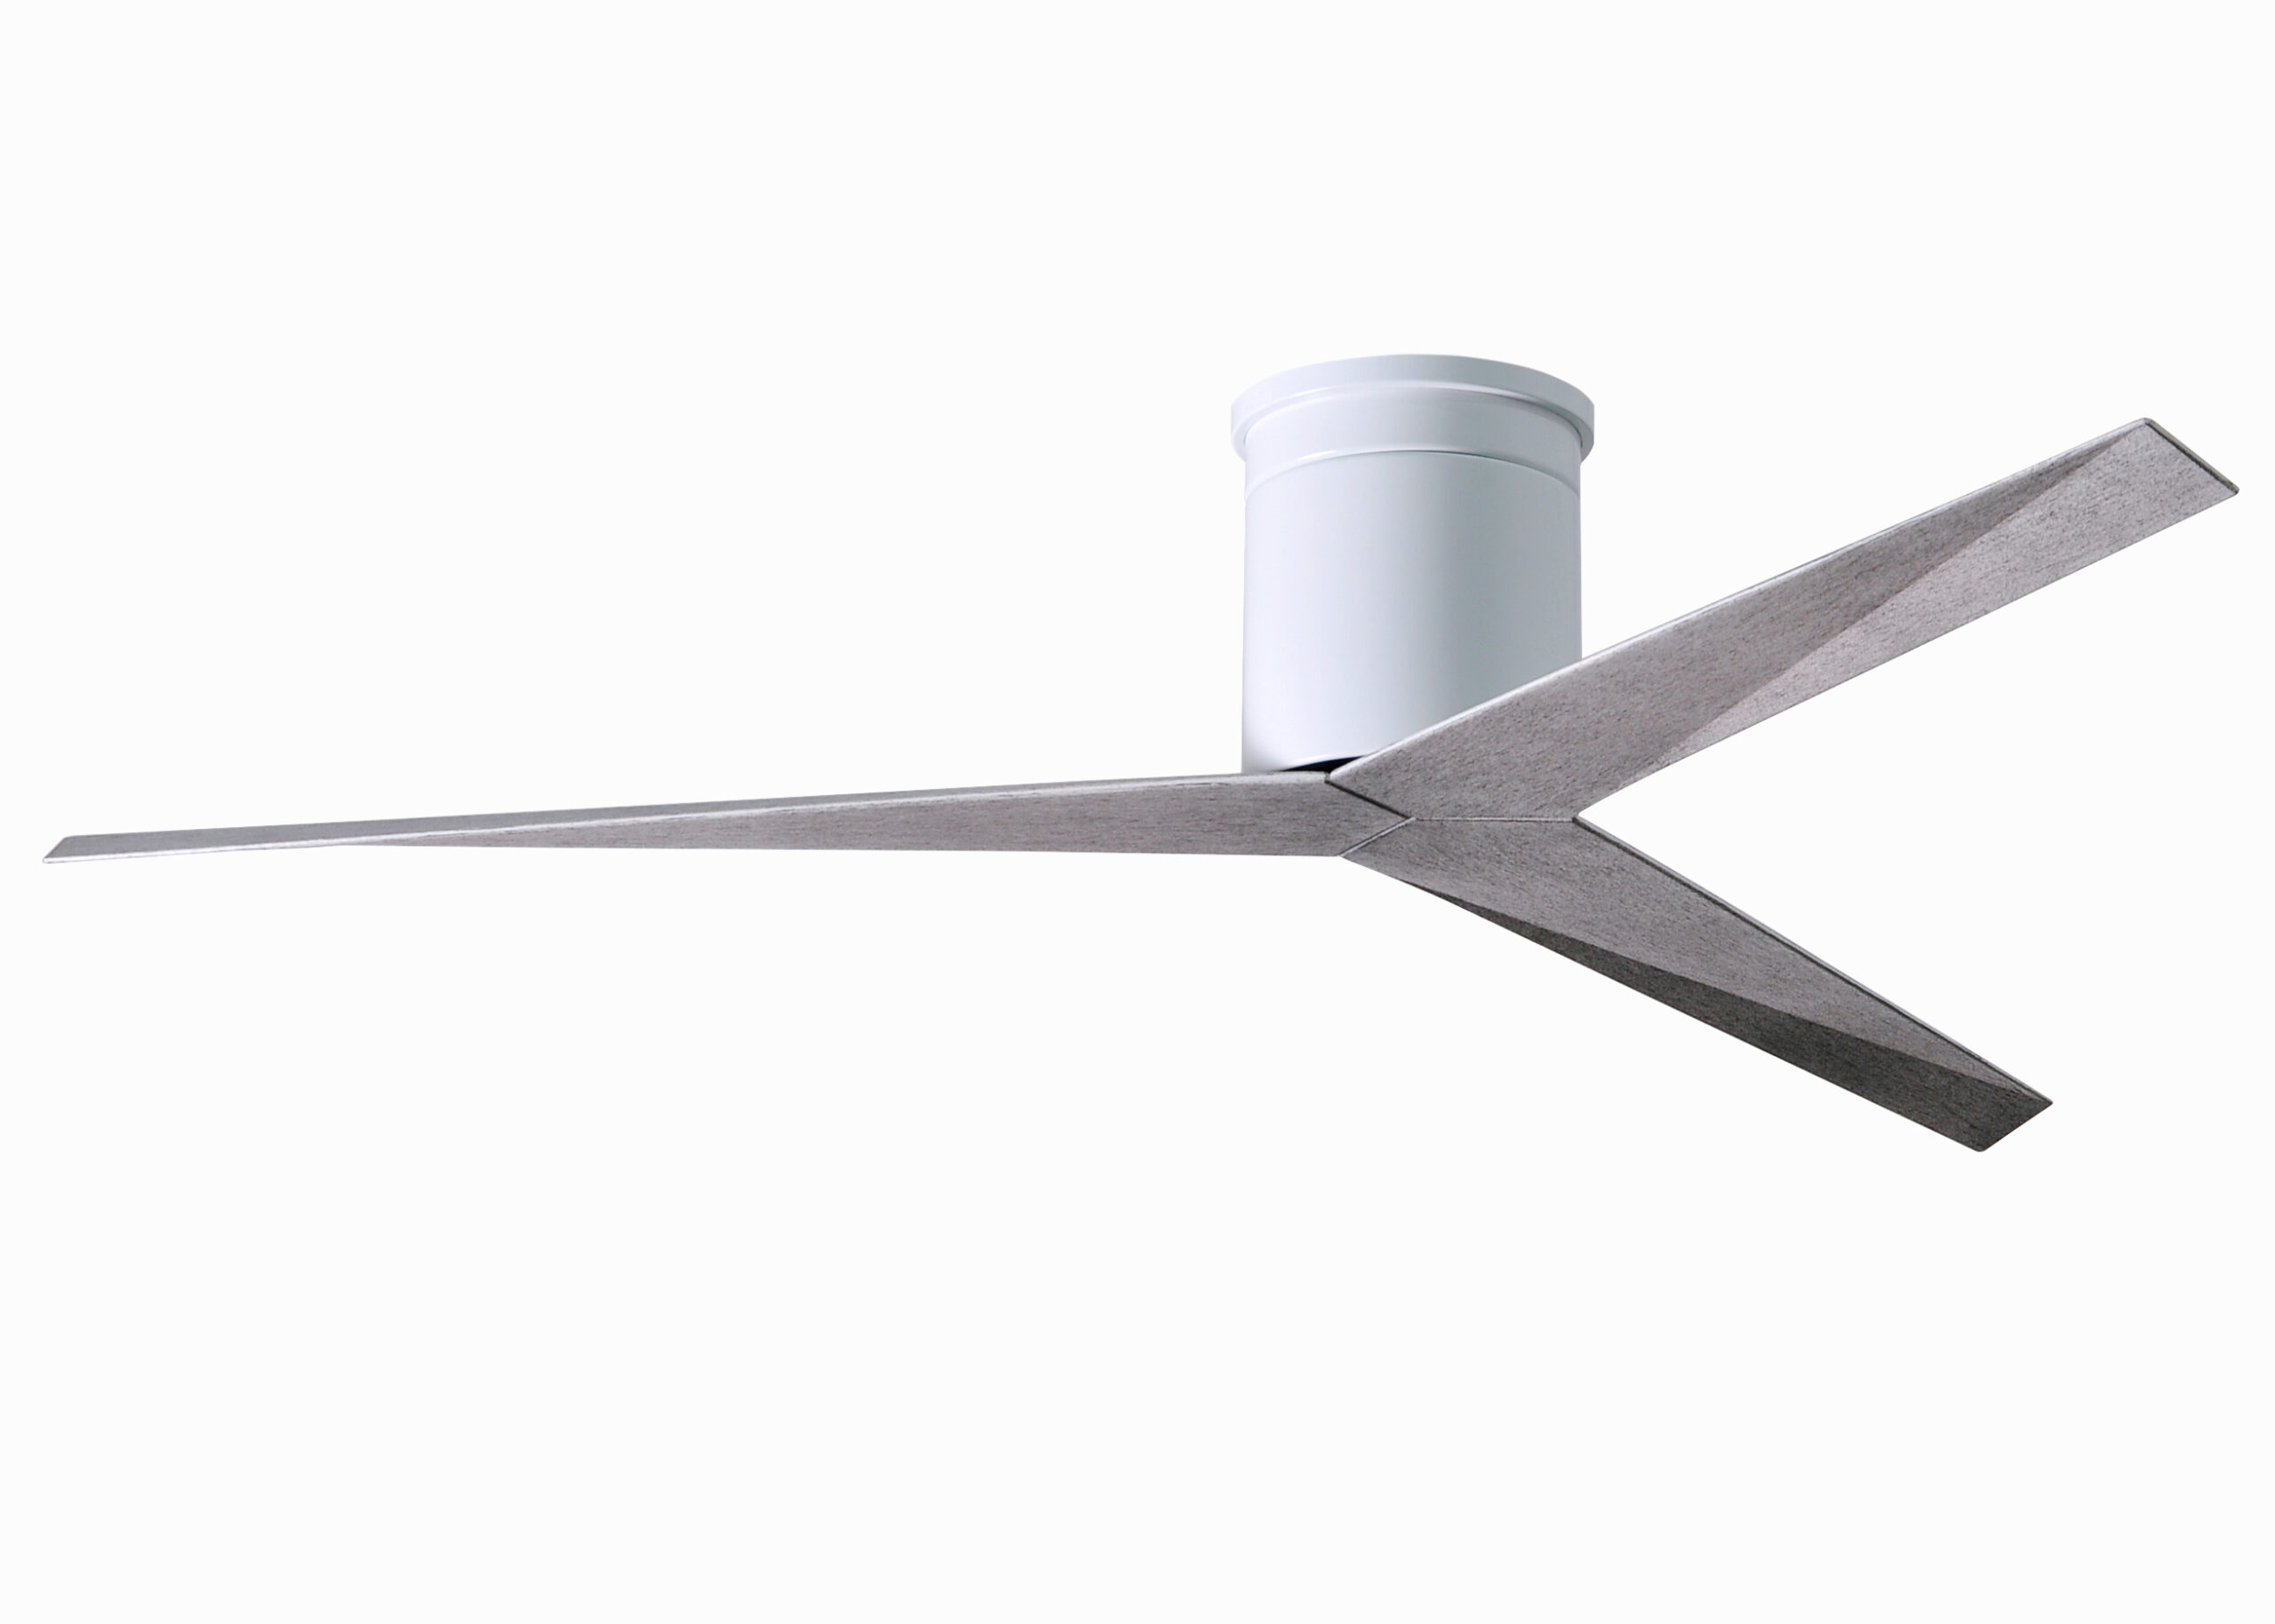 Eliza-H Ceiling Fan in Gloss White with Barn Wood Blades